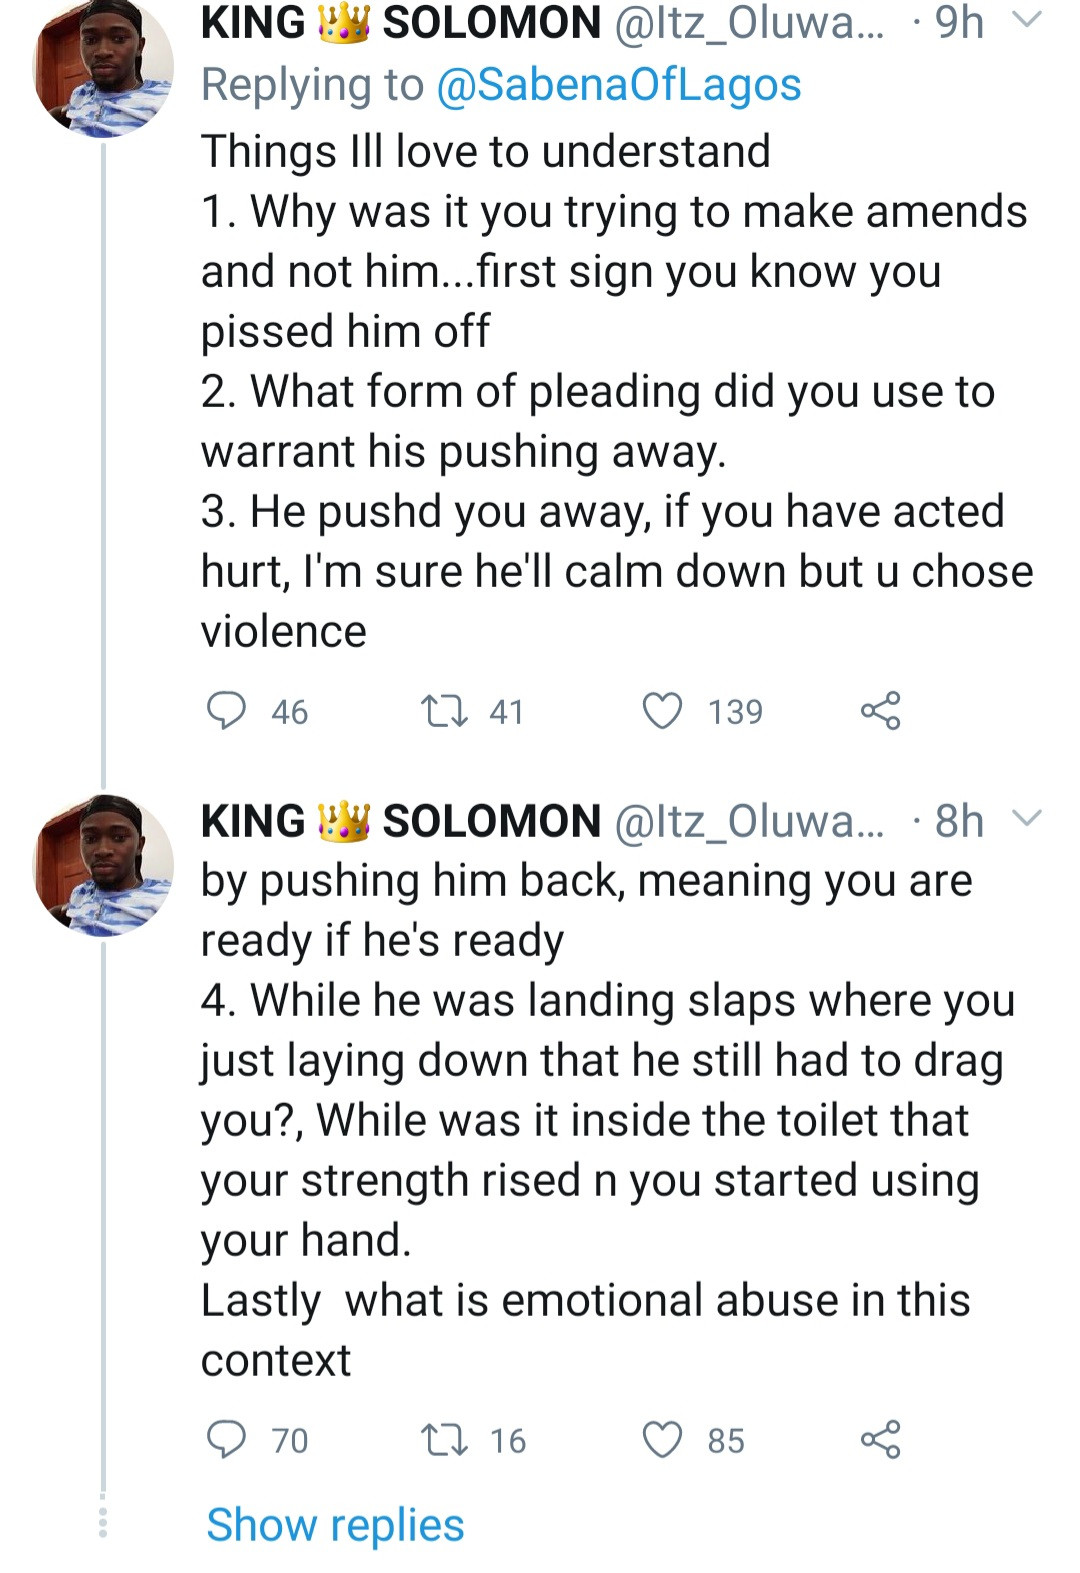 twitter influencer accuses her boyfriend of abusing her and conniving with police to intimidate her he responds with his side of the story 5